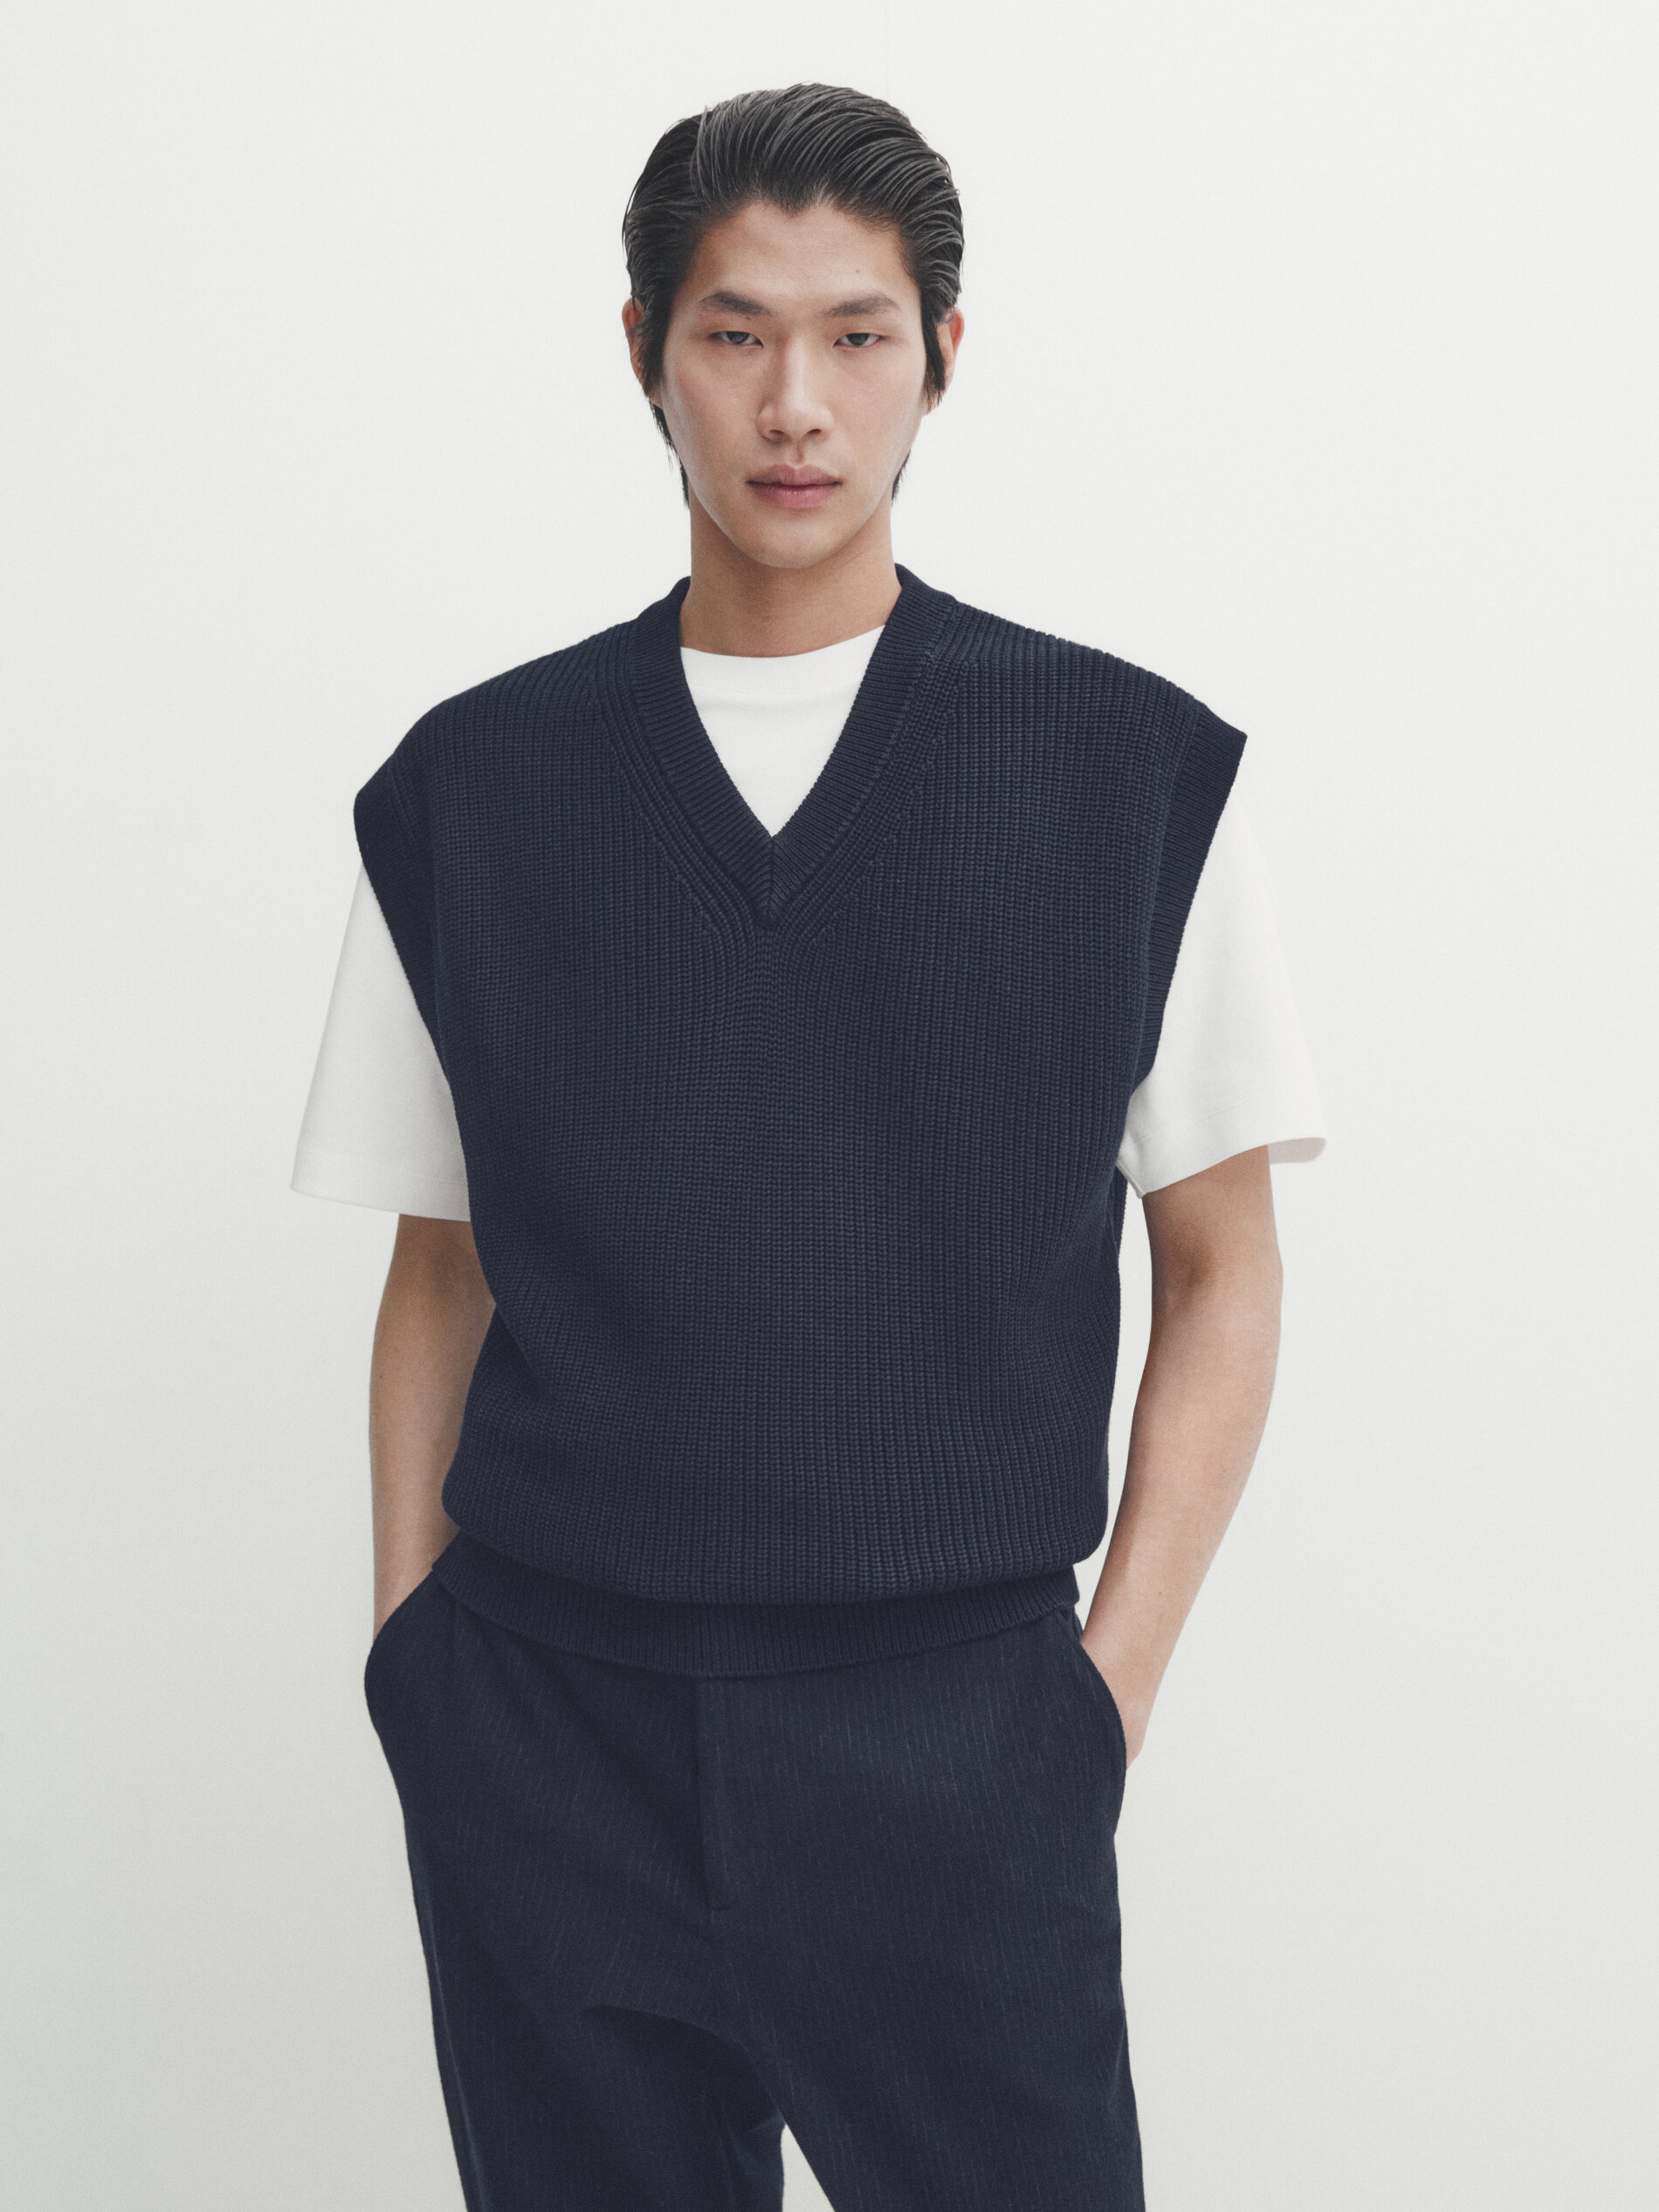 V-neck knit vest · Navy Blue · Sweaters And Cardigans | Massimo Dutti